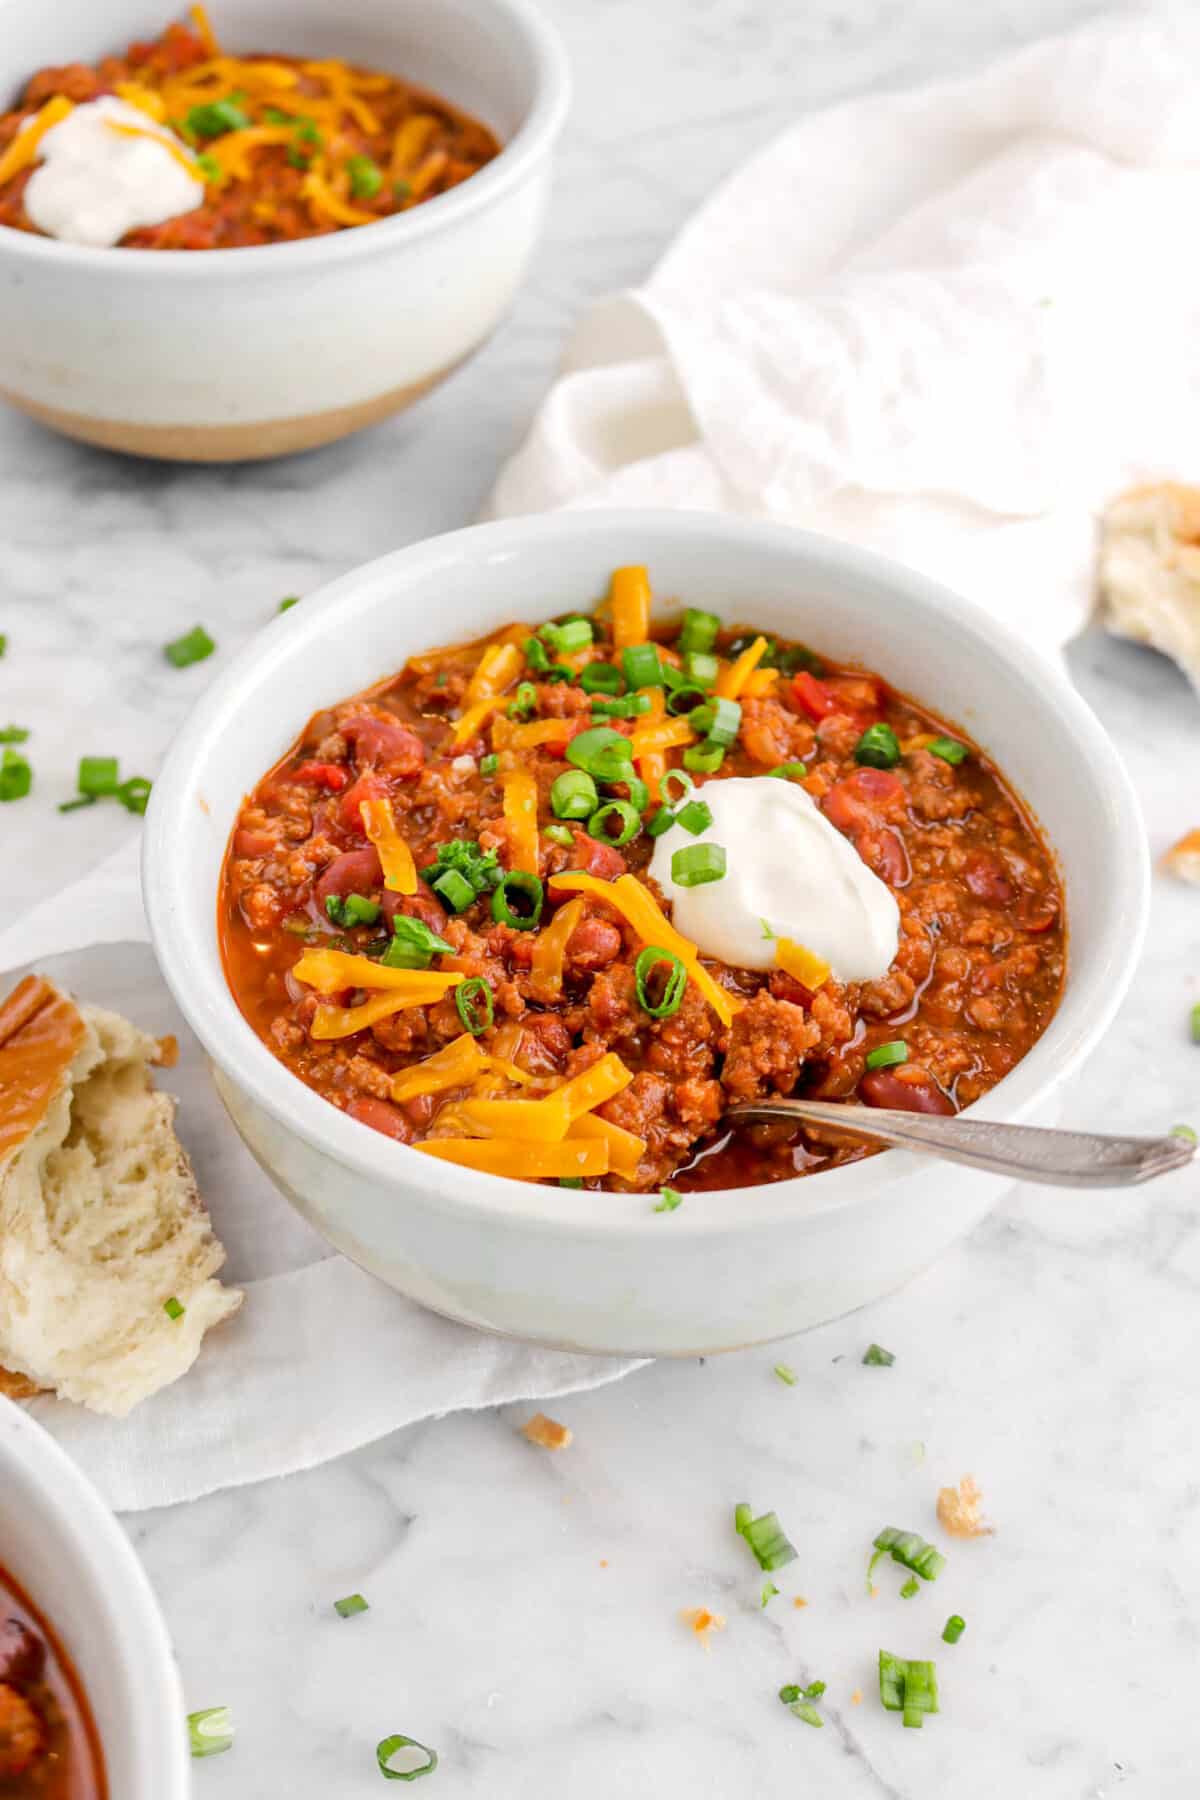 bowl of chili on white napkin with bread chunk beside and a bowl of chili behind